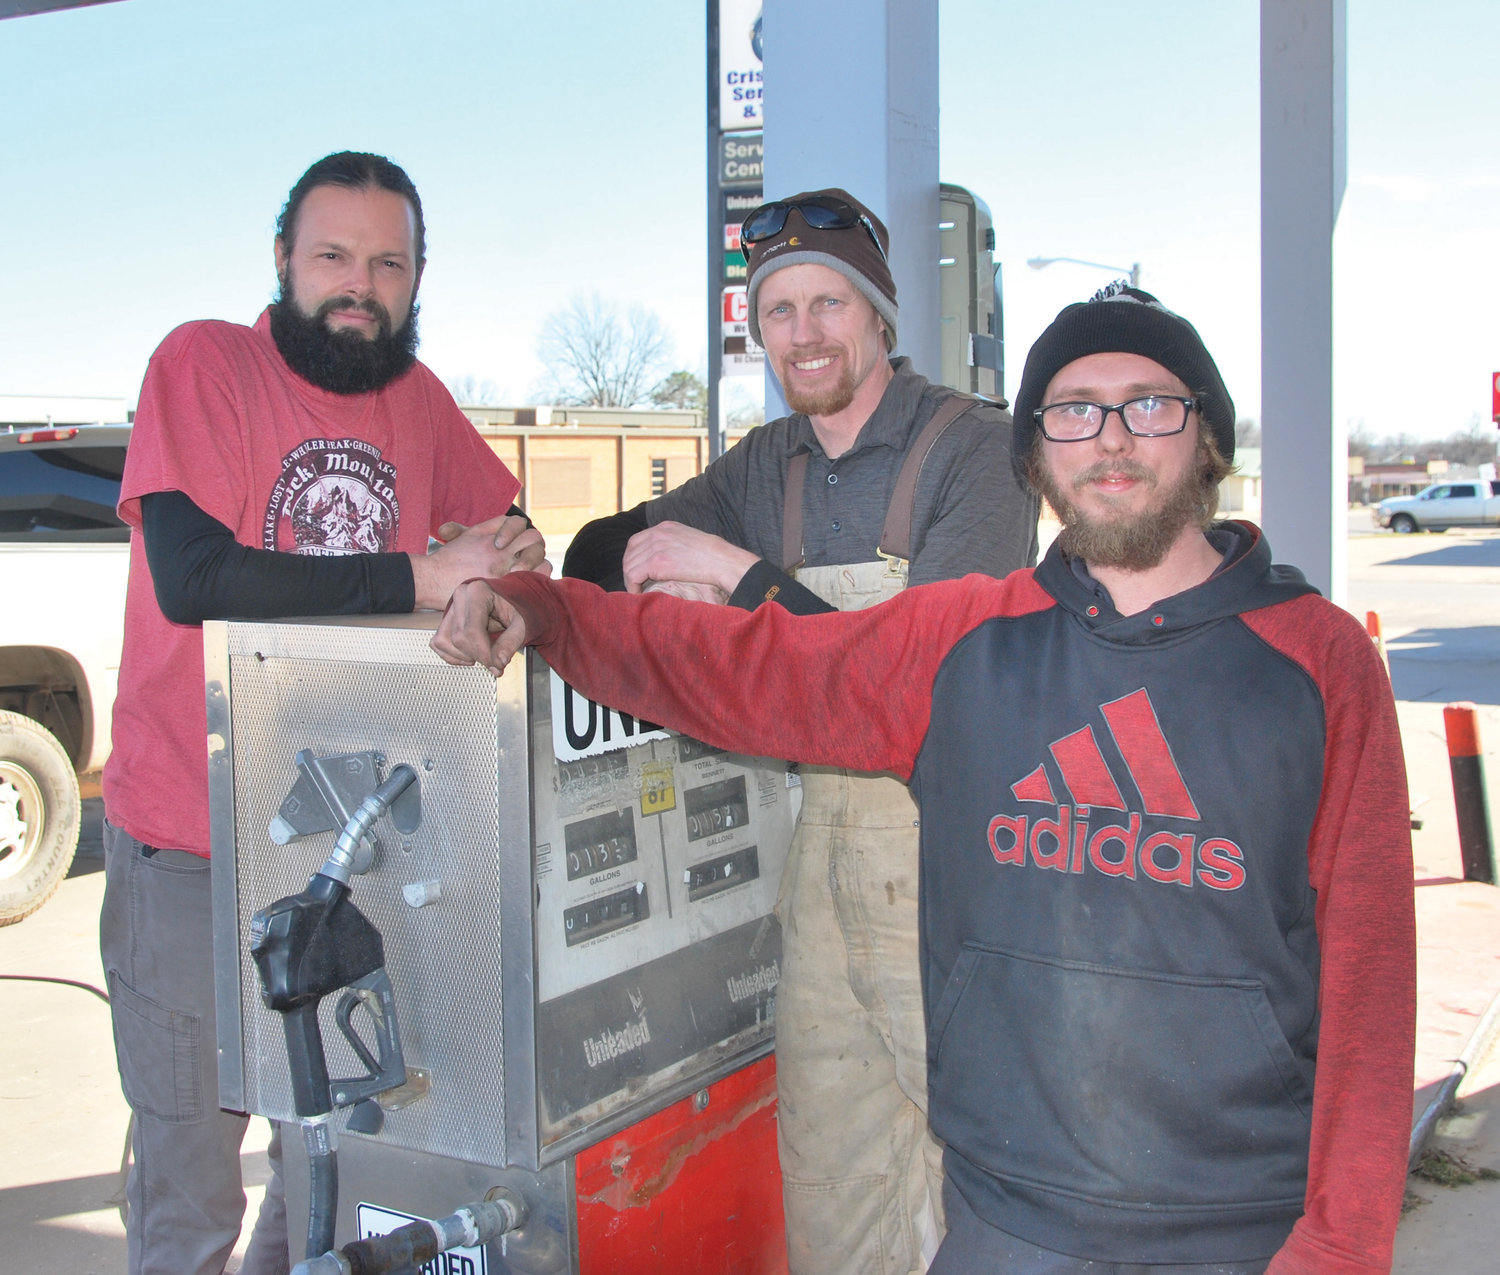 Criswell’s Service Station continues the full and hometown service customers have grown accustomed to. Brandon, Aaron and Nick Criswell are continuing the legacy set before them by their father and grandfather, the late Jimmy Criswell.